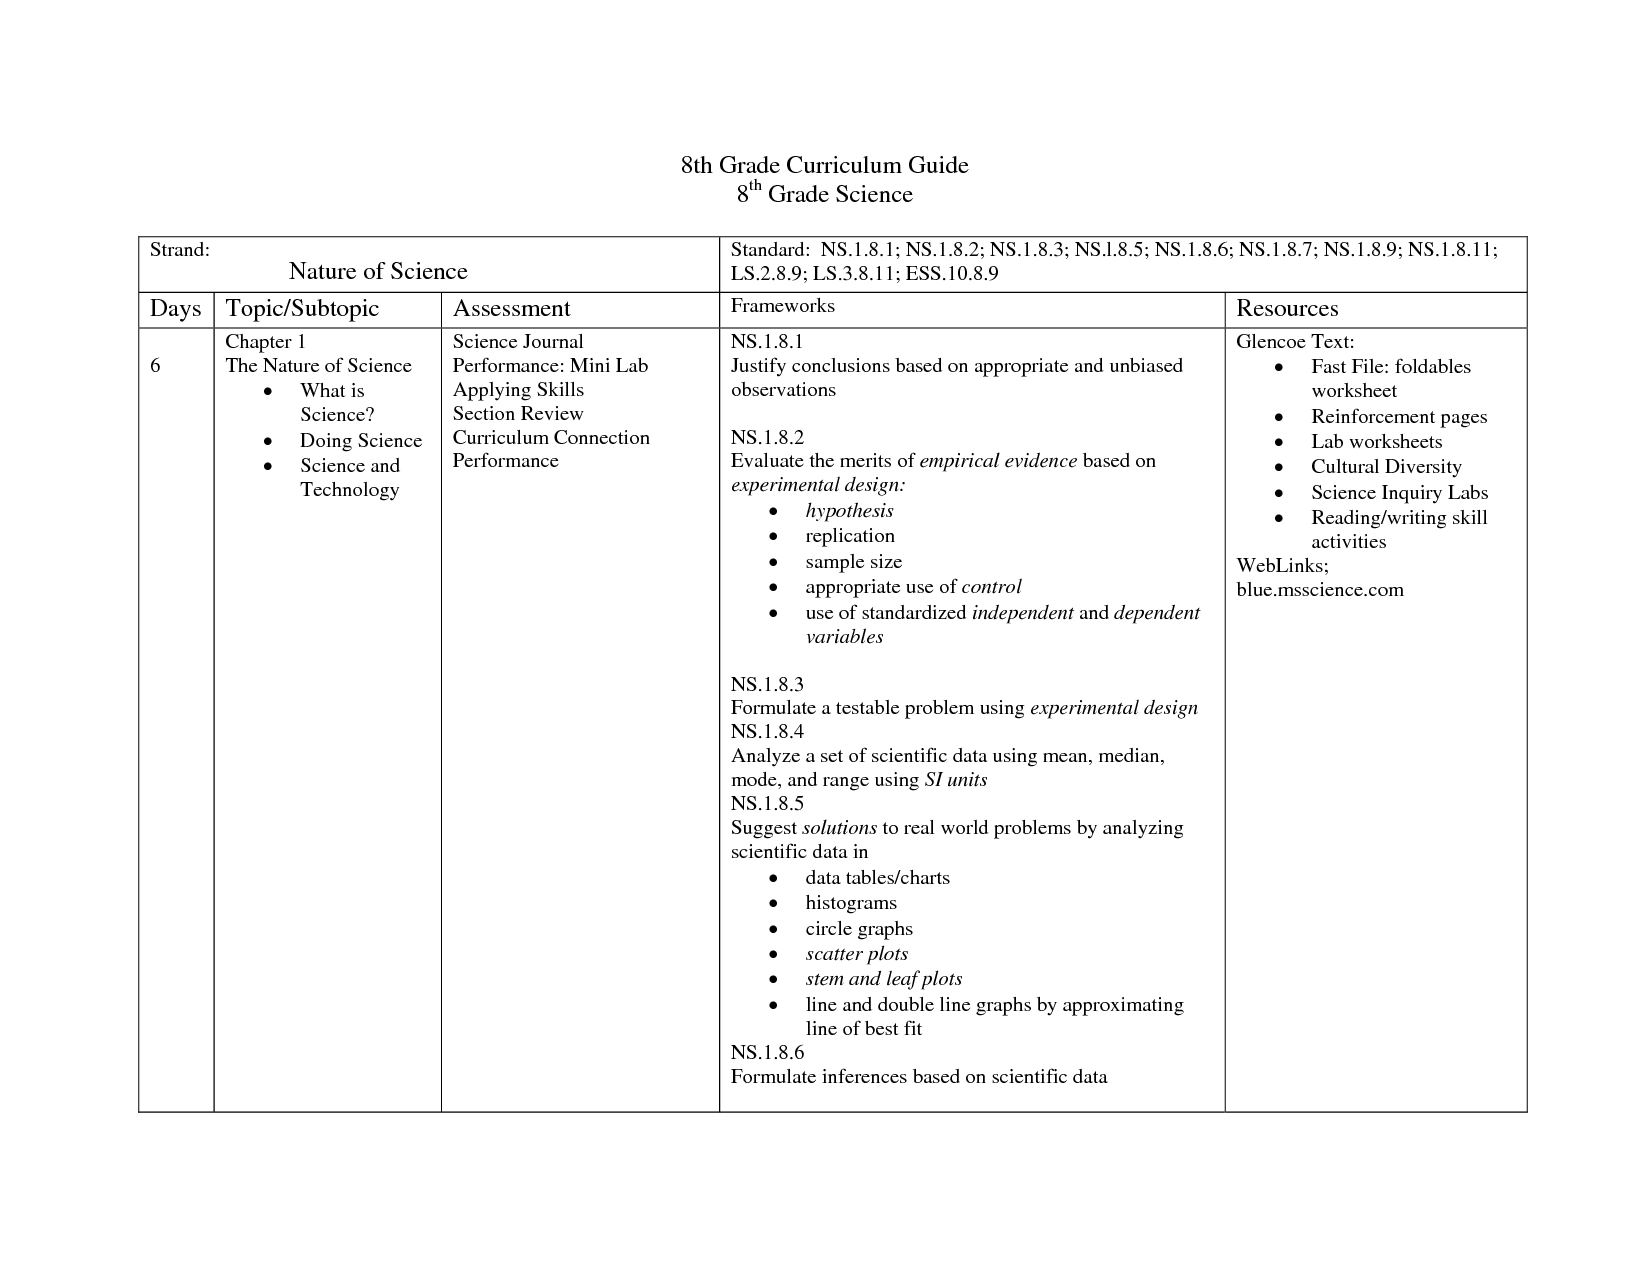 Glencoe 8th Grade Science Worksheet Answers Chapter 6 Image